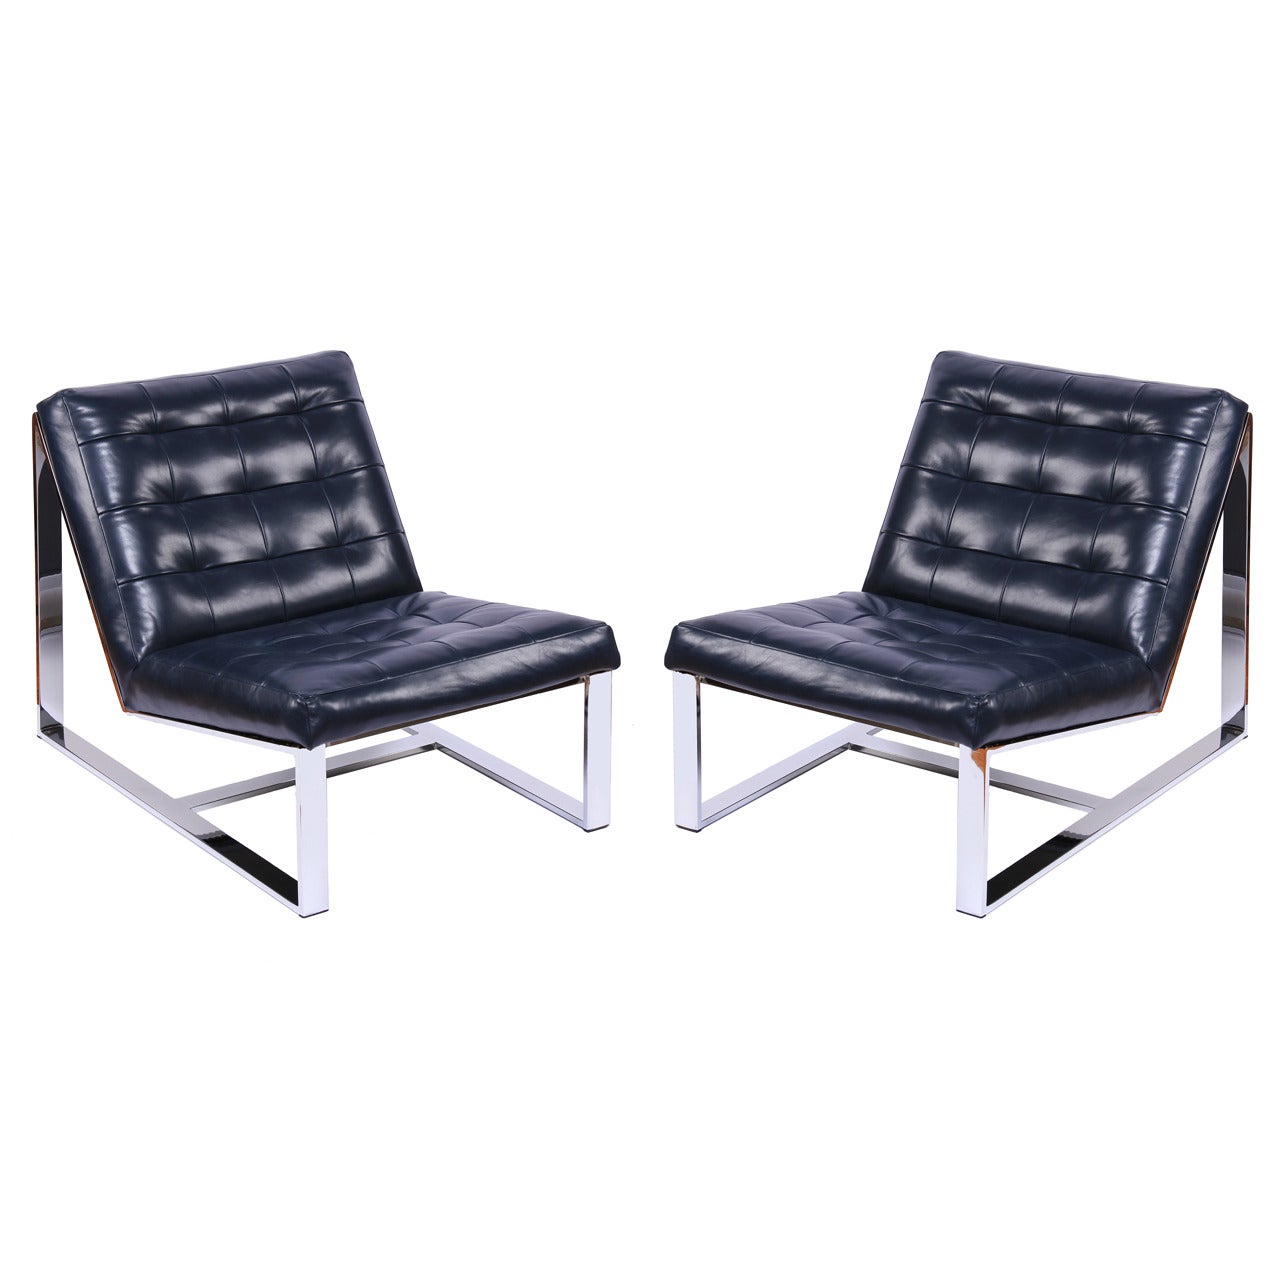 Pair of Milo Baughman Leather and Chrome Slipper Chairs